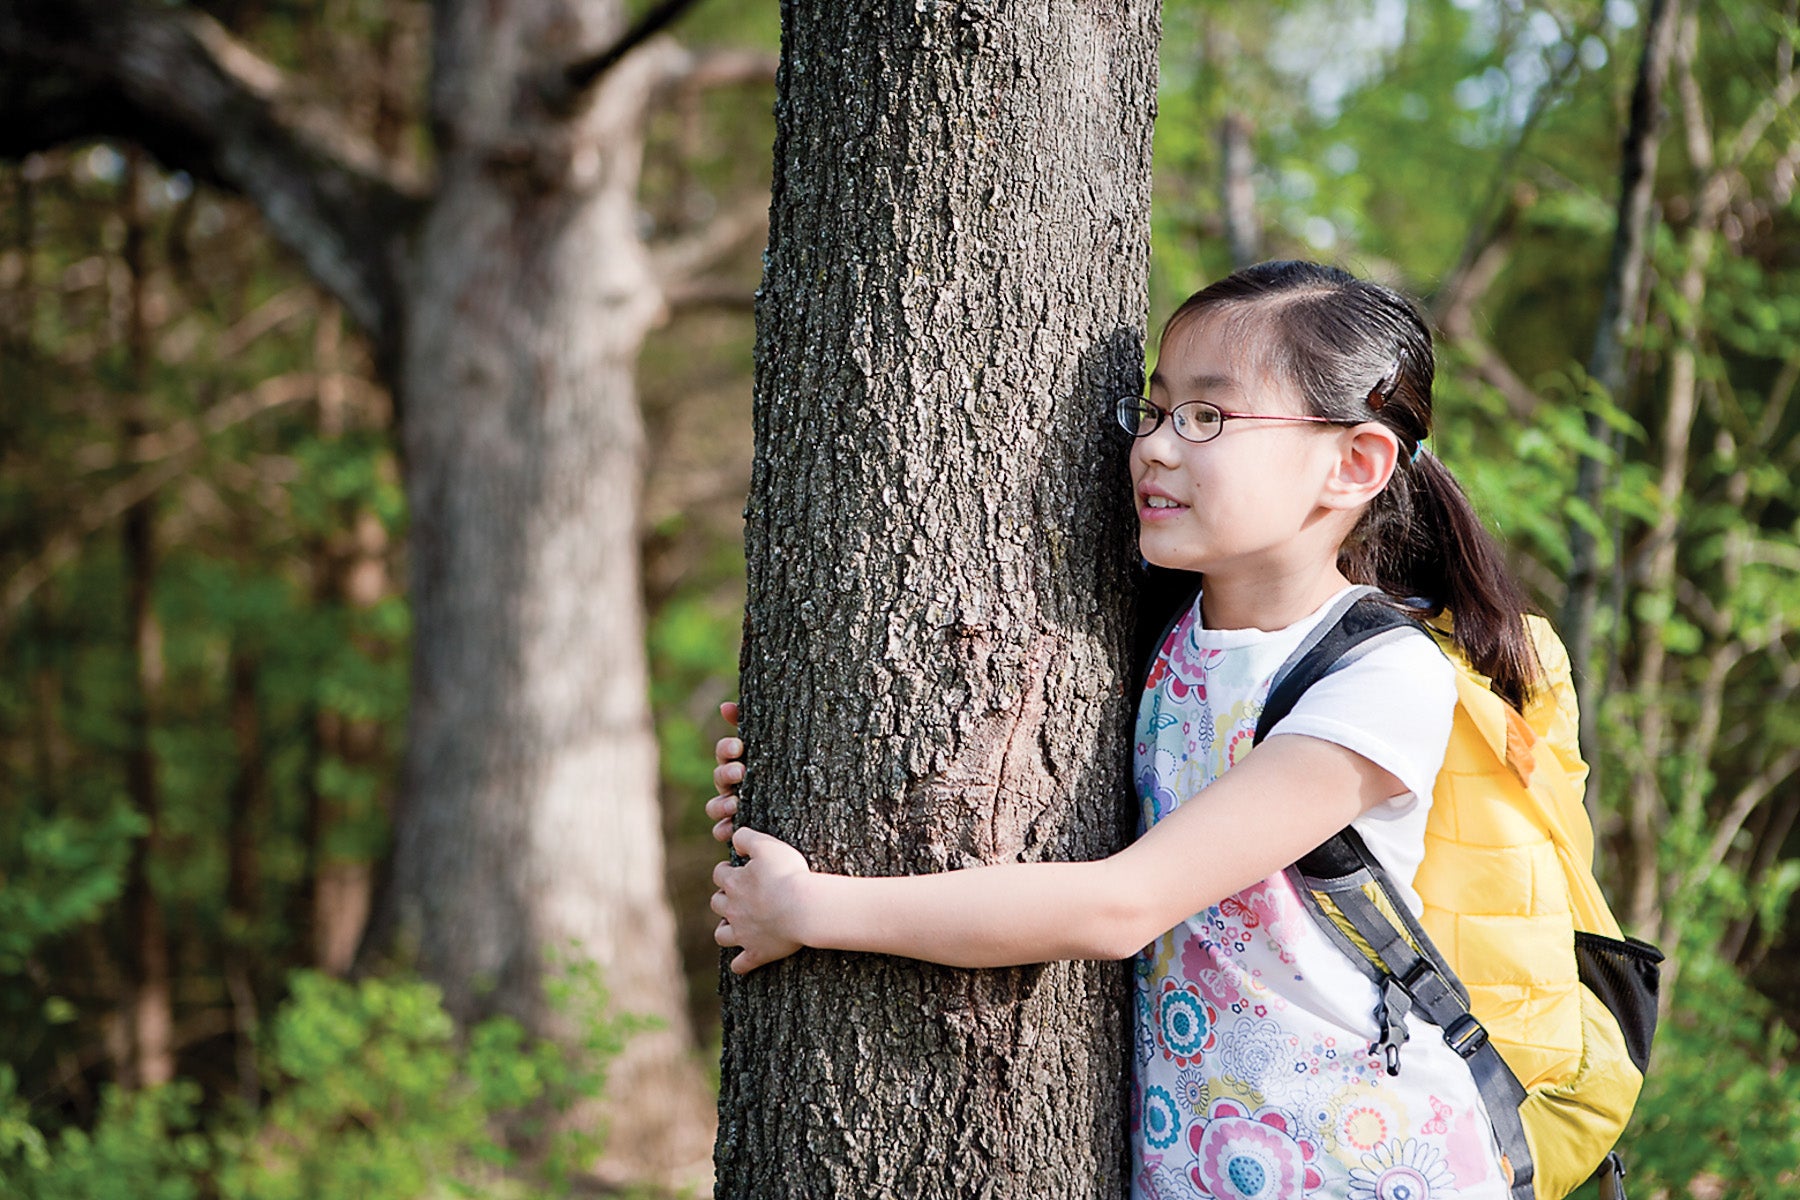 Girl hugs tree so companions can find her while on hike